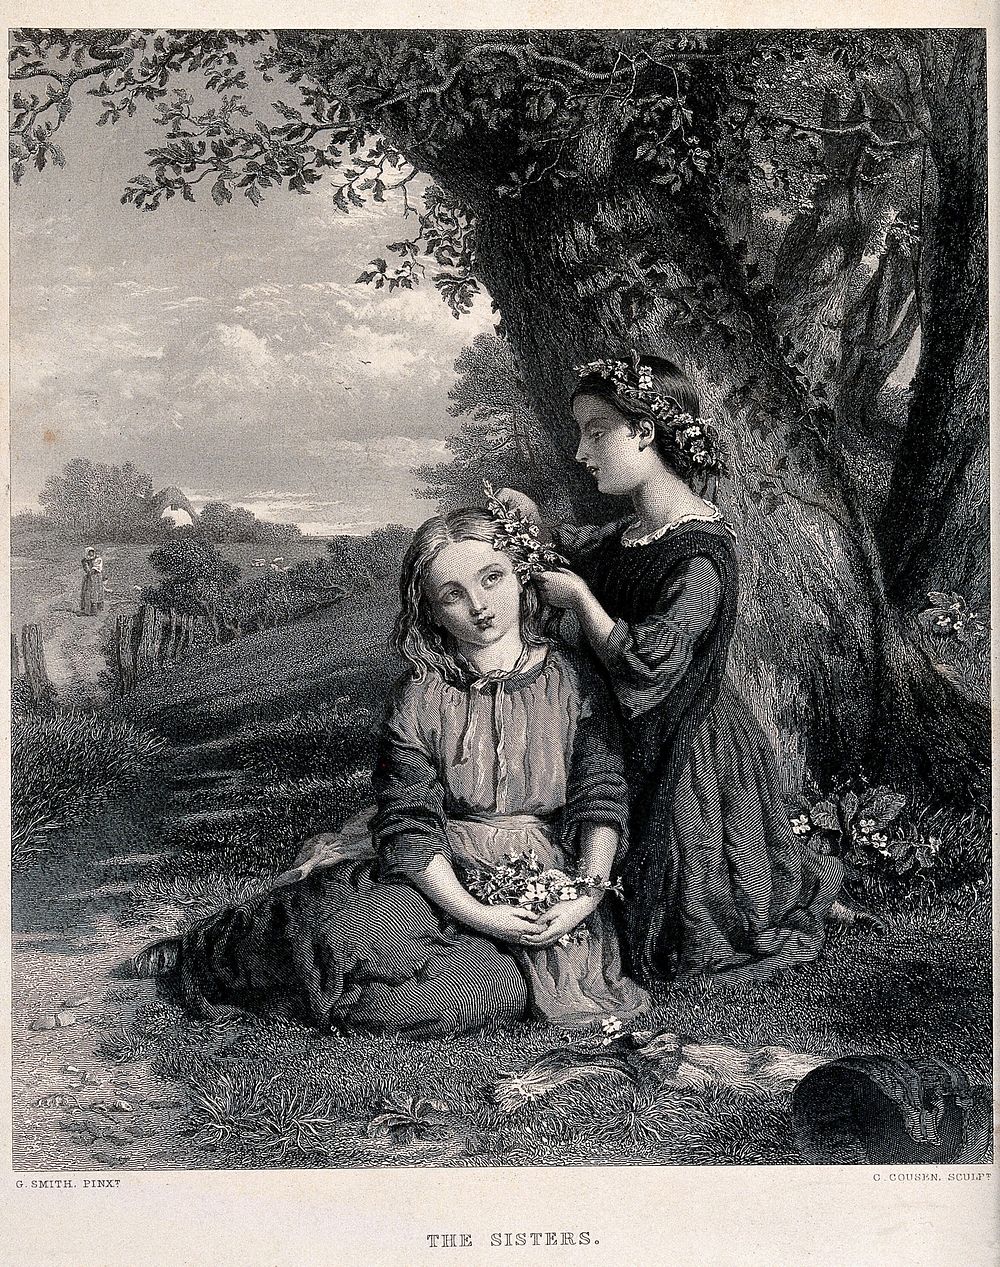 Two sisters sit under a tree decorating each others' hair with flowers. Engraving by C. Cousen after G. Smith.